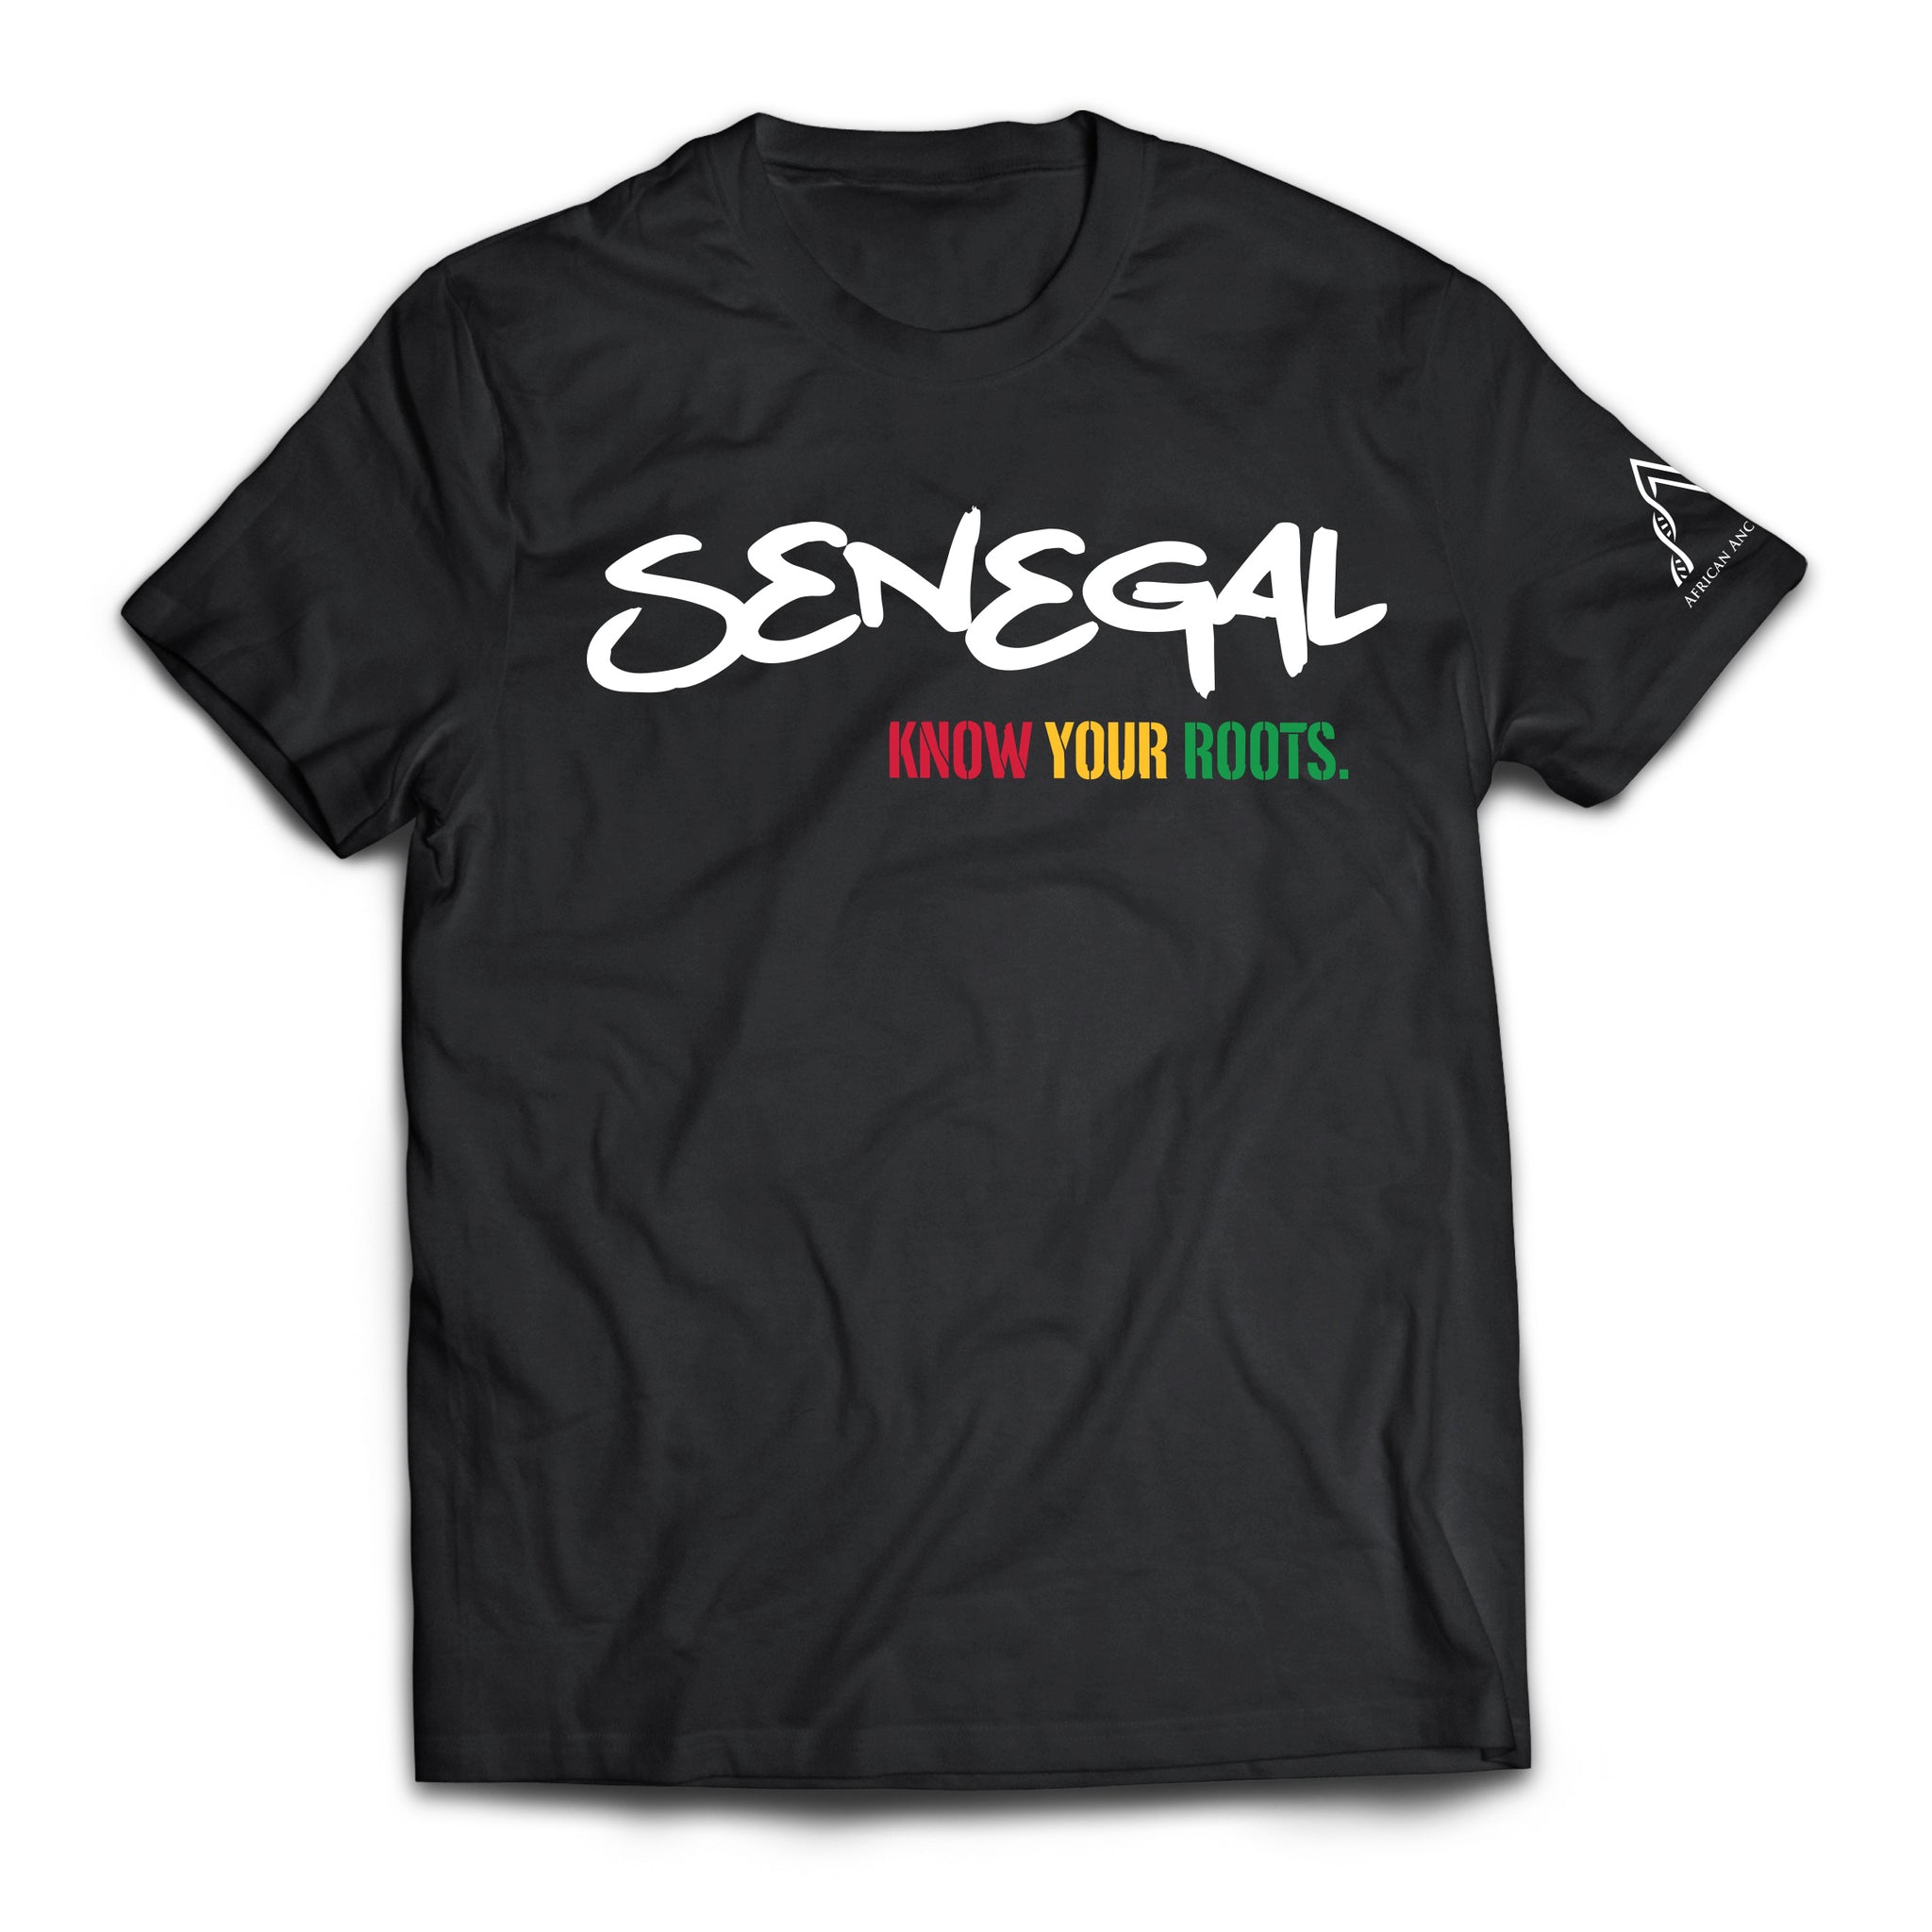 African Ancestry Senegal T-Shirt with "Know Your Roots" written in African colors"